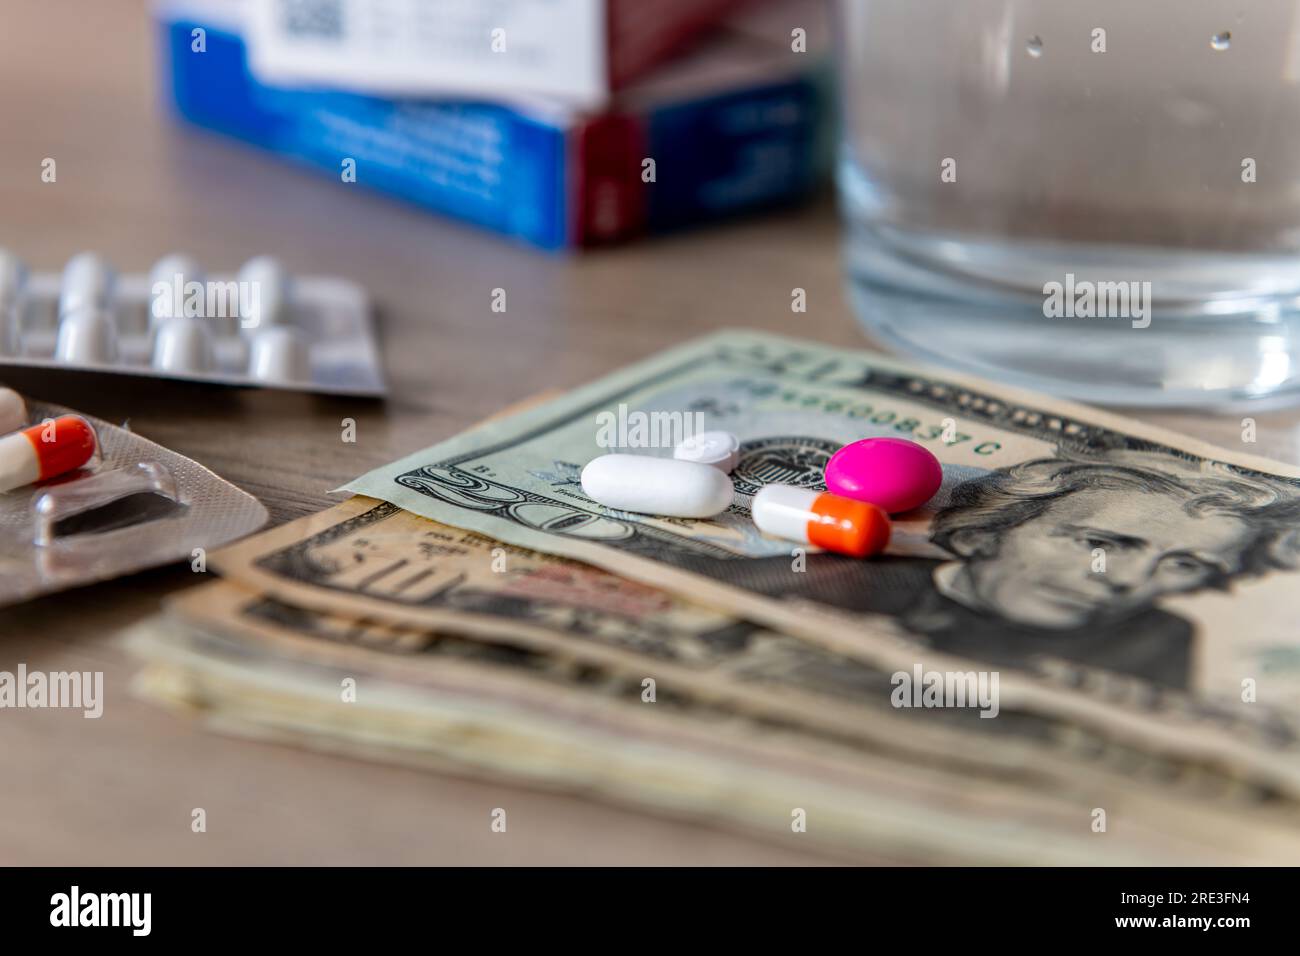 A medical cost concept with a glass of water, various medicine and US dollar bills. Stock Photo